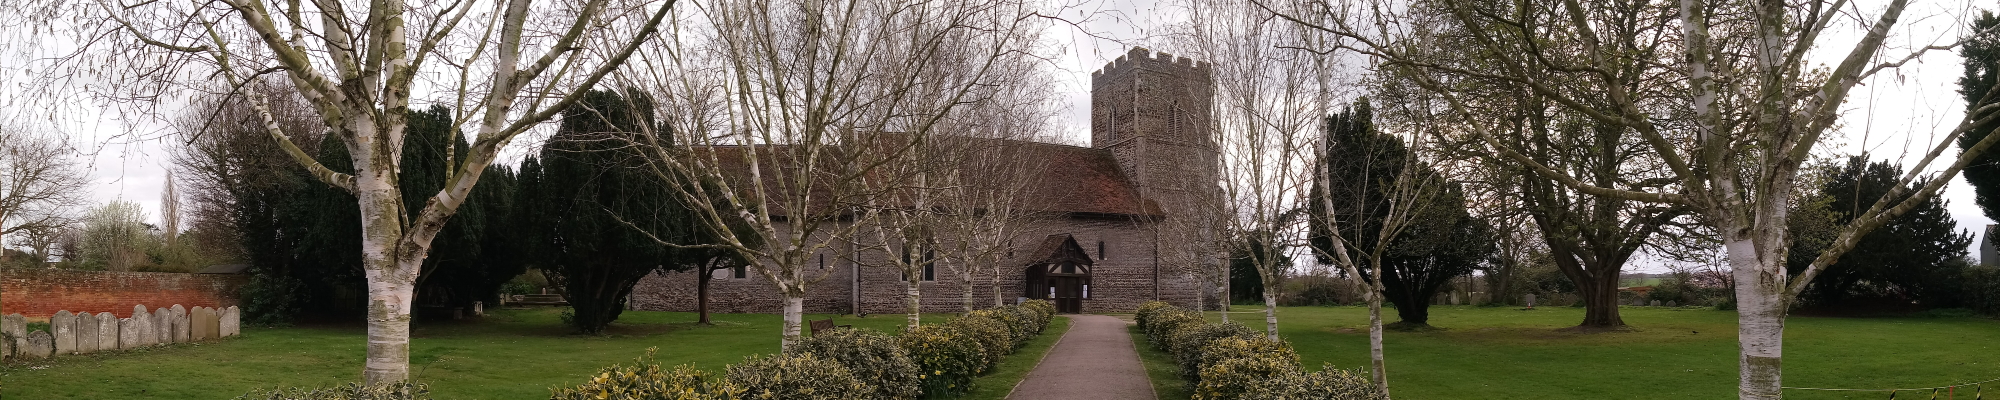 St Mary's Church, Great Bentley